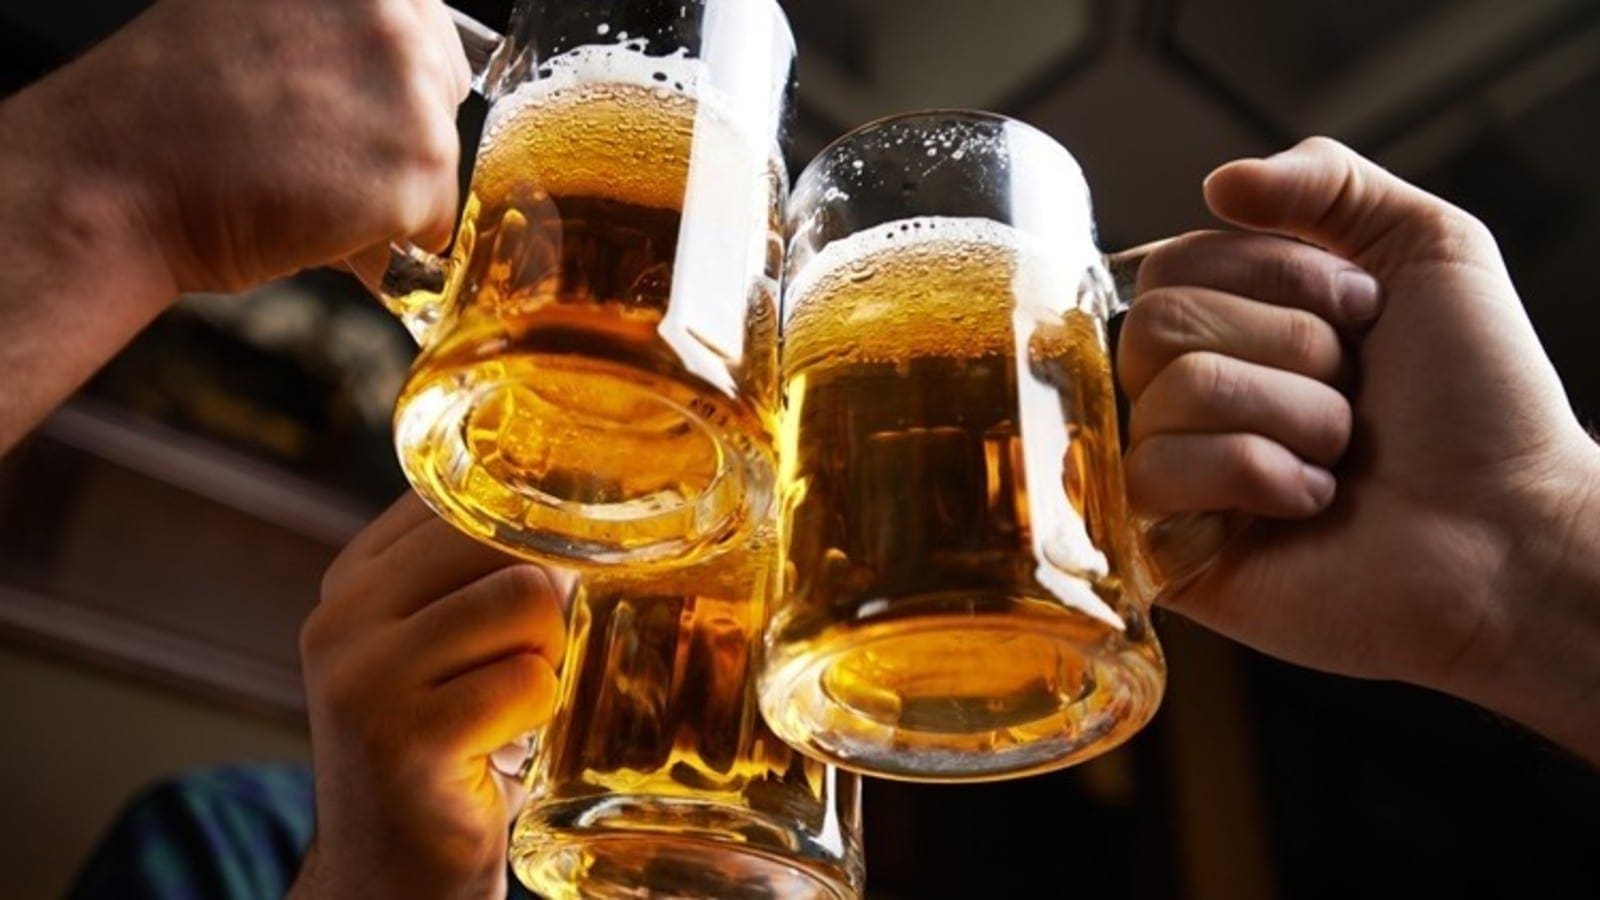 Troubled times ahead for South African Brewers as state reintroduces ban on Alcohol